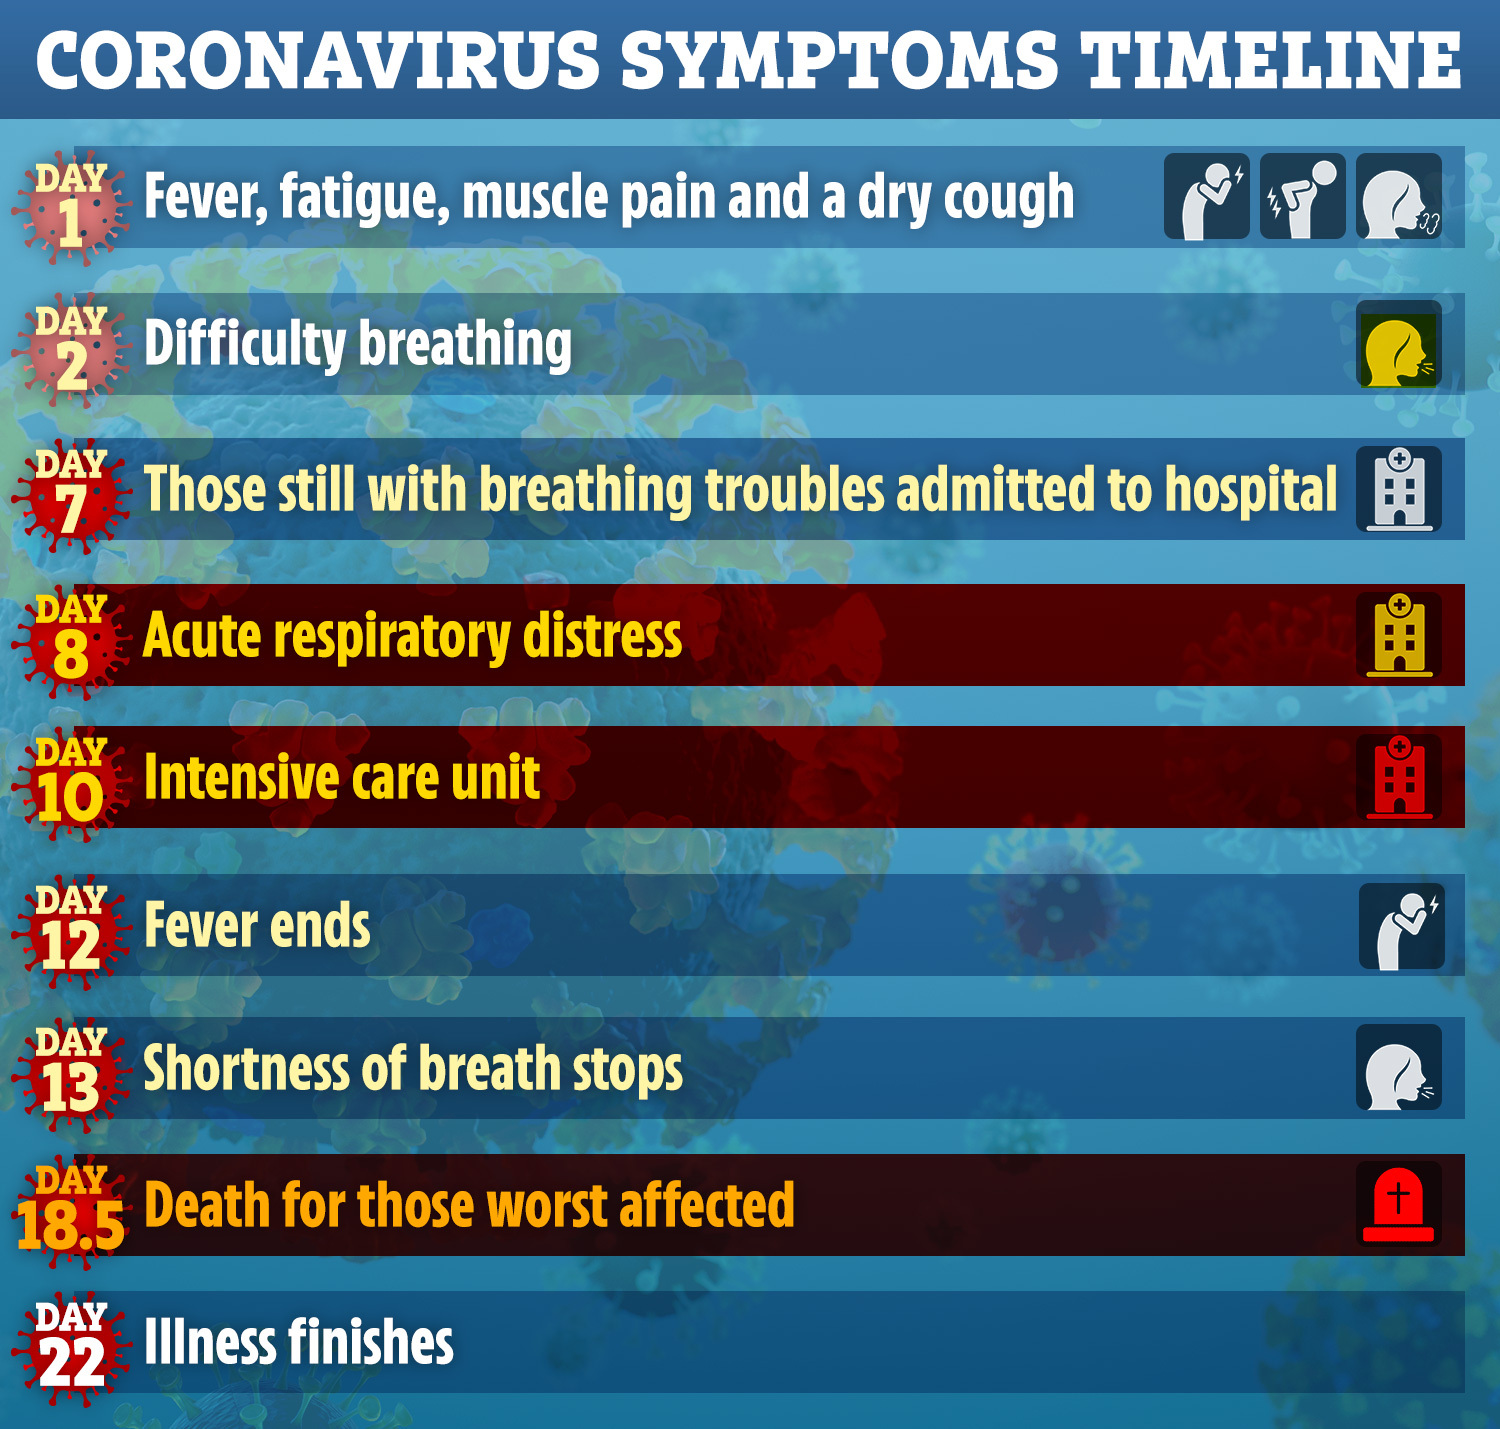  Scientists have produced a day-by-day breakdown of the typical Covid-19 symptoms